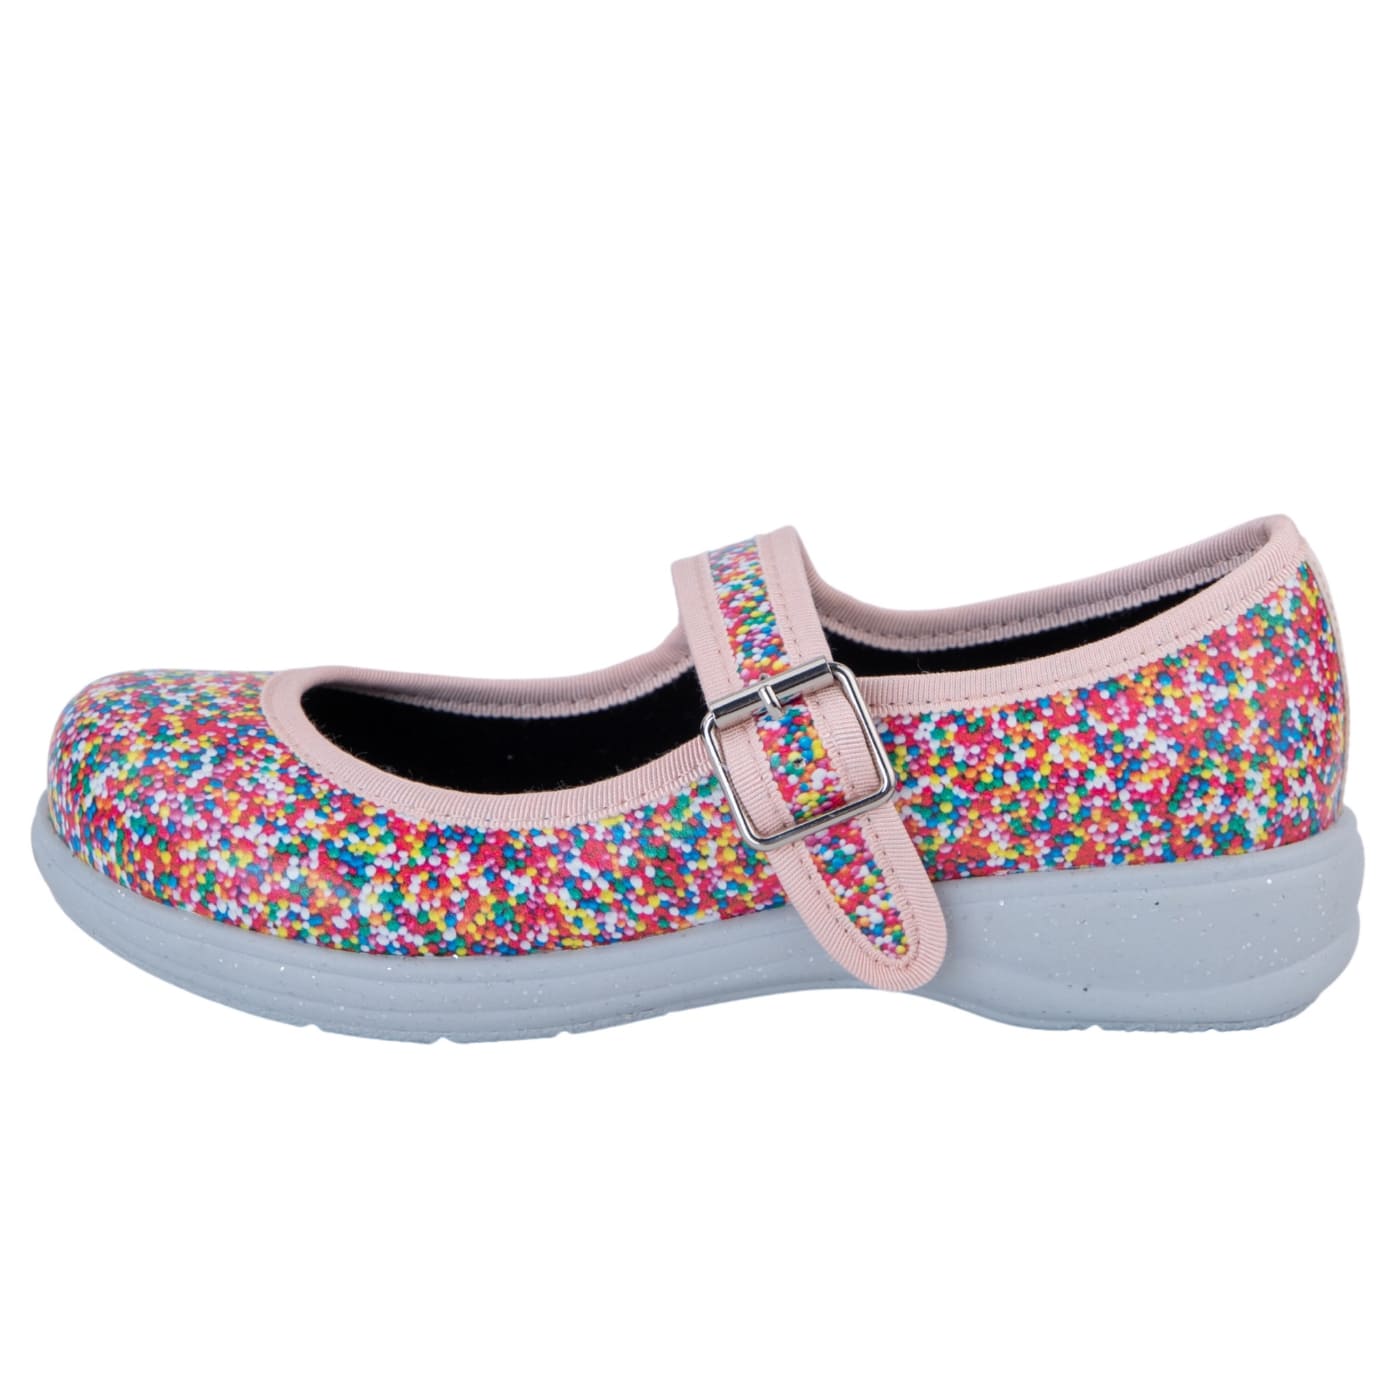 Sprinkles Mary Janes by RainbowsAndFairies.com.au (Fairy Bread - 100s & 1000s - Mismatched Shoes - Glitter Soles - Glitter - Quirky) - SKU: FW_MARYJ_SPRNK_ORG - Pic-04